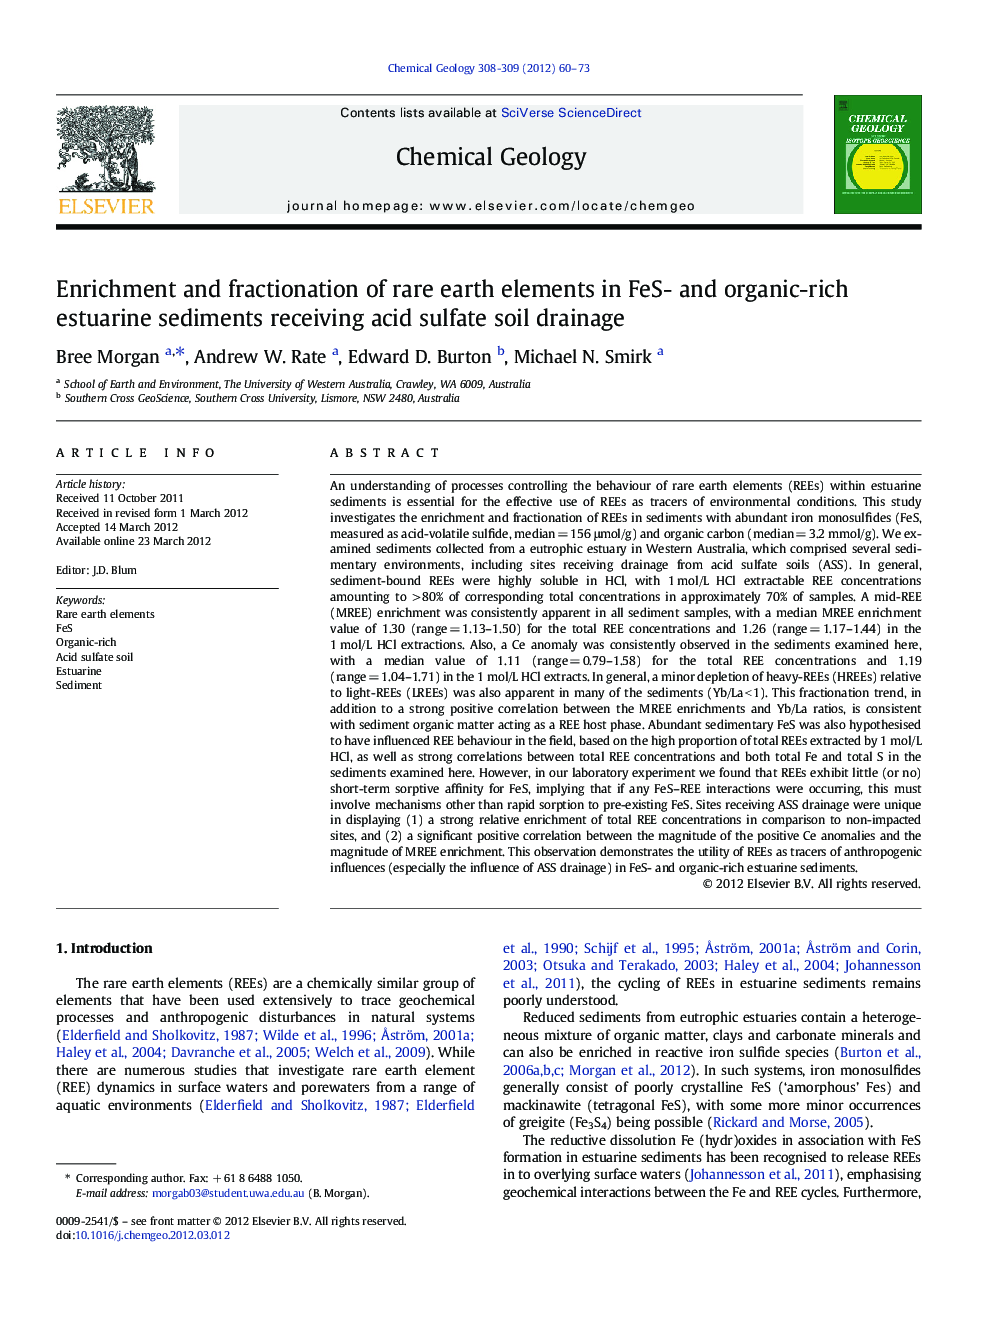 Enrichment and fractionation of rare earth elements in FeS- and organic-rich estuarine sediments receiving acid sulfate soil drainage